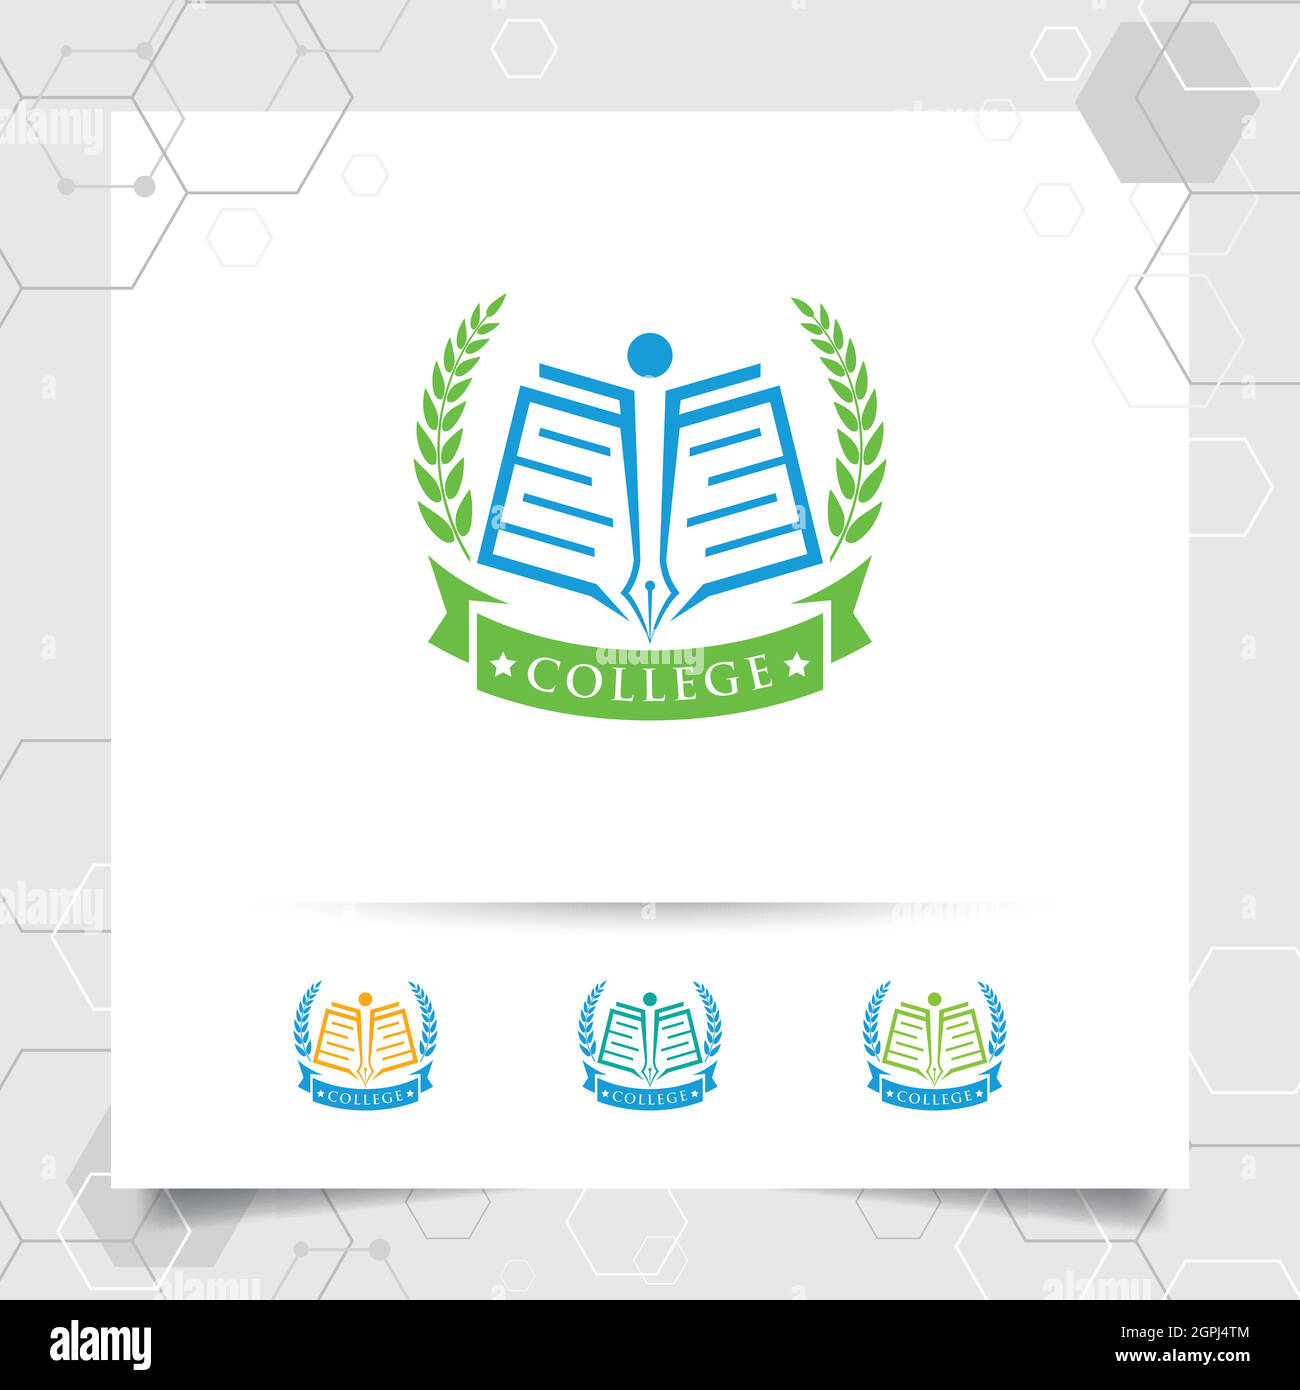 Education logo vector design with concept of book, pen, and wreaths icon illustration for academy, university, school. Stock Vector